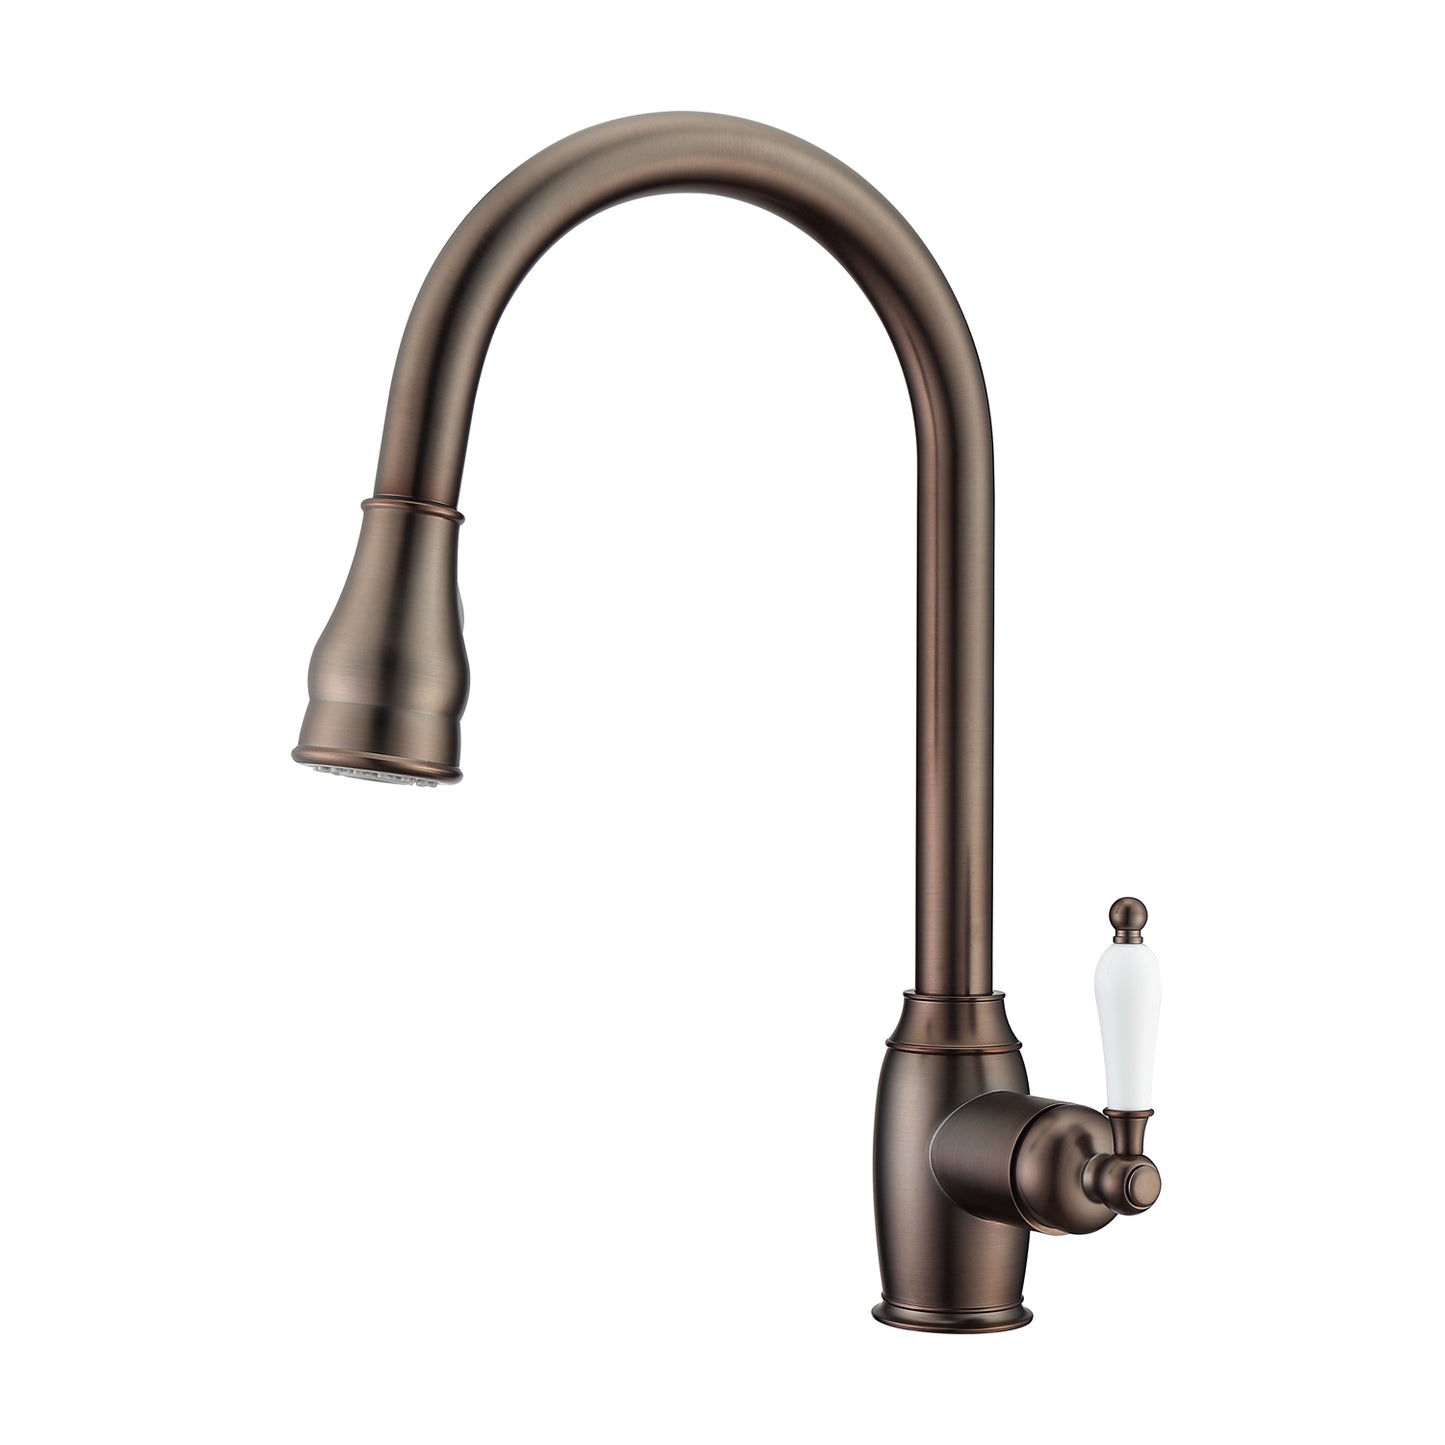 Bay Kitchen Faucet, Pull-Out Sprayer, Single Porcelain Lever Handle, Oil Rubbed Bronze